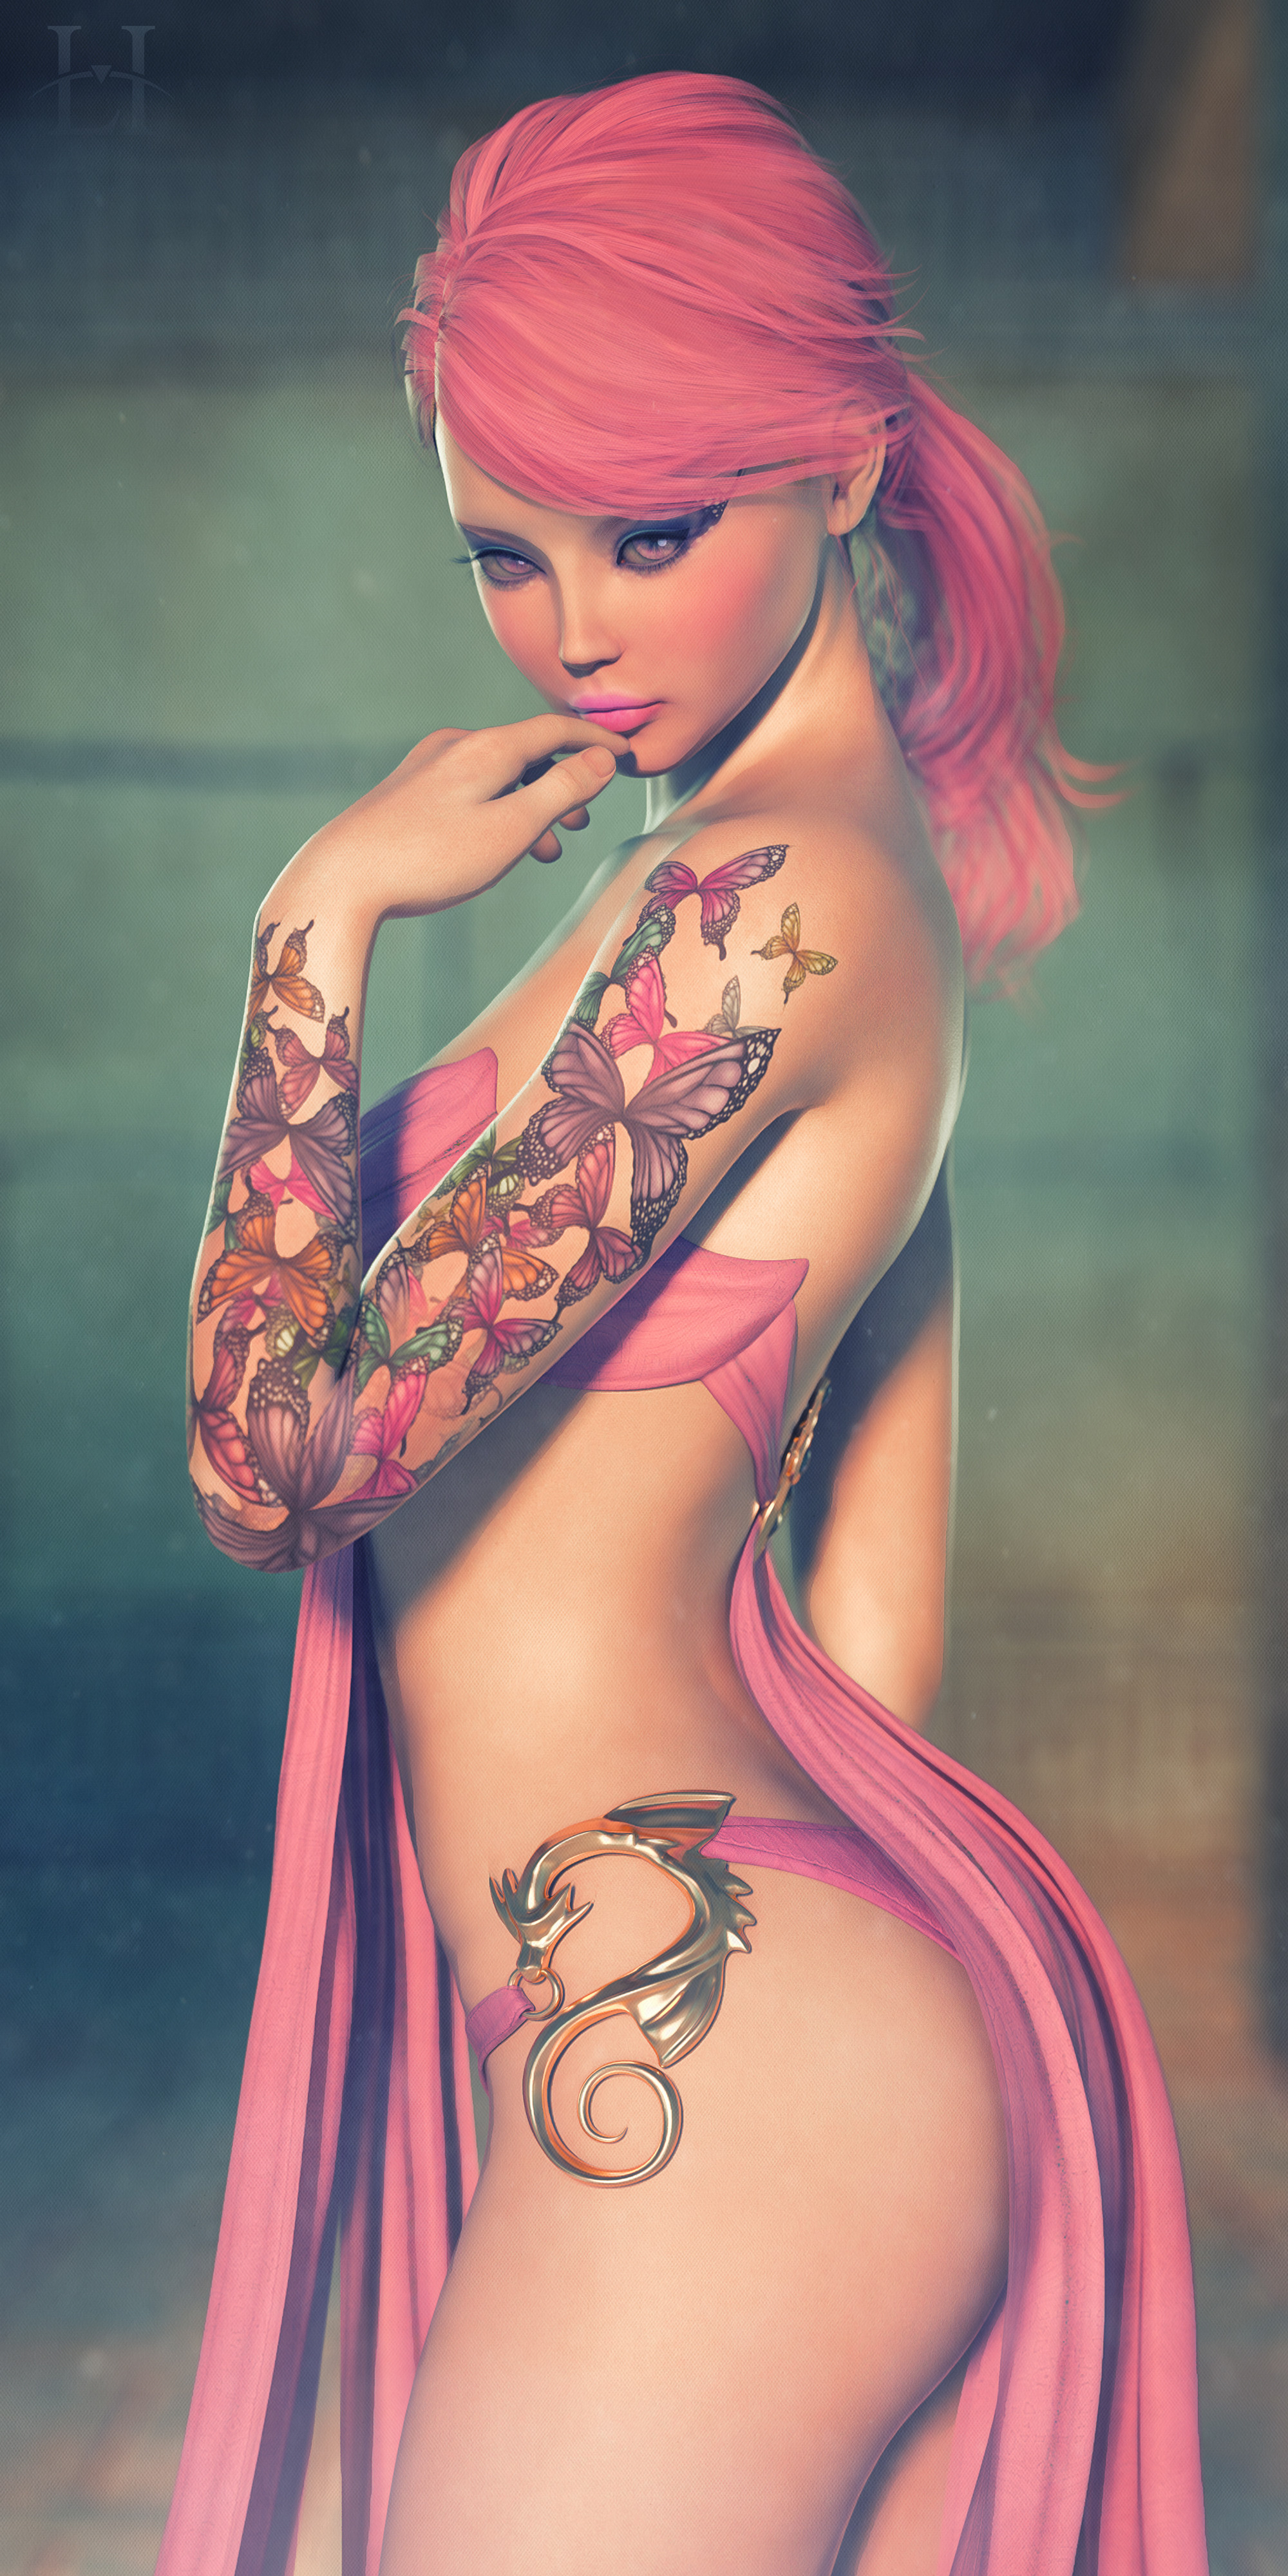 General 2000x4000 Laticis Imagery (Artist) ponytail touching face pink eyes pink hair tattoo sleeve digital art CGI tattoo portrait display women side view looking away ArtStation skimpy clothes